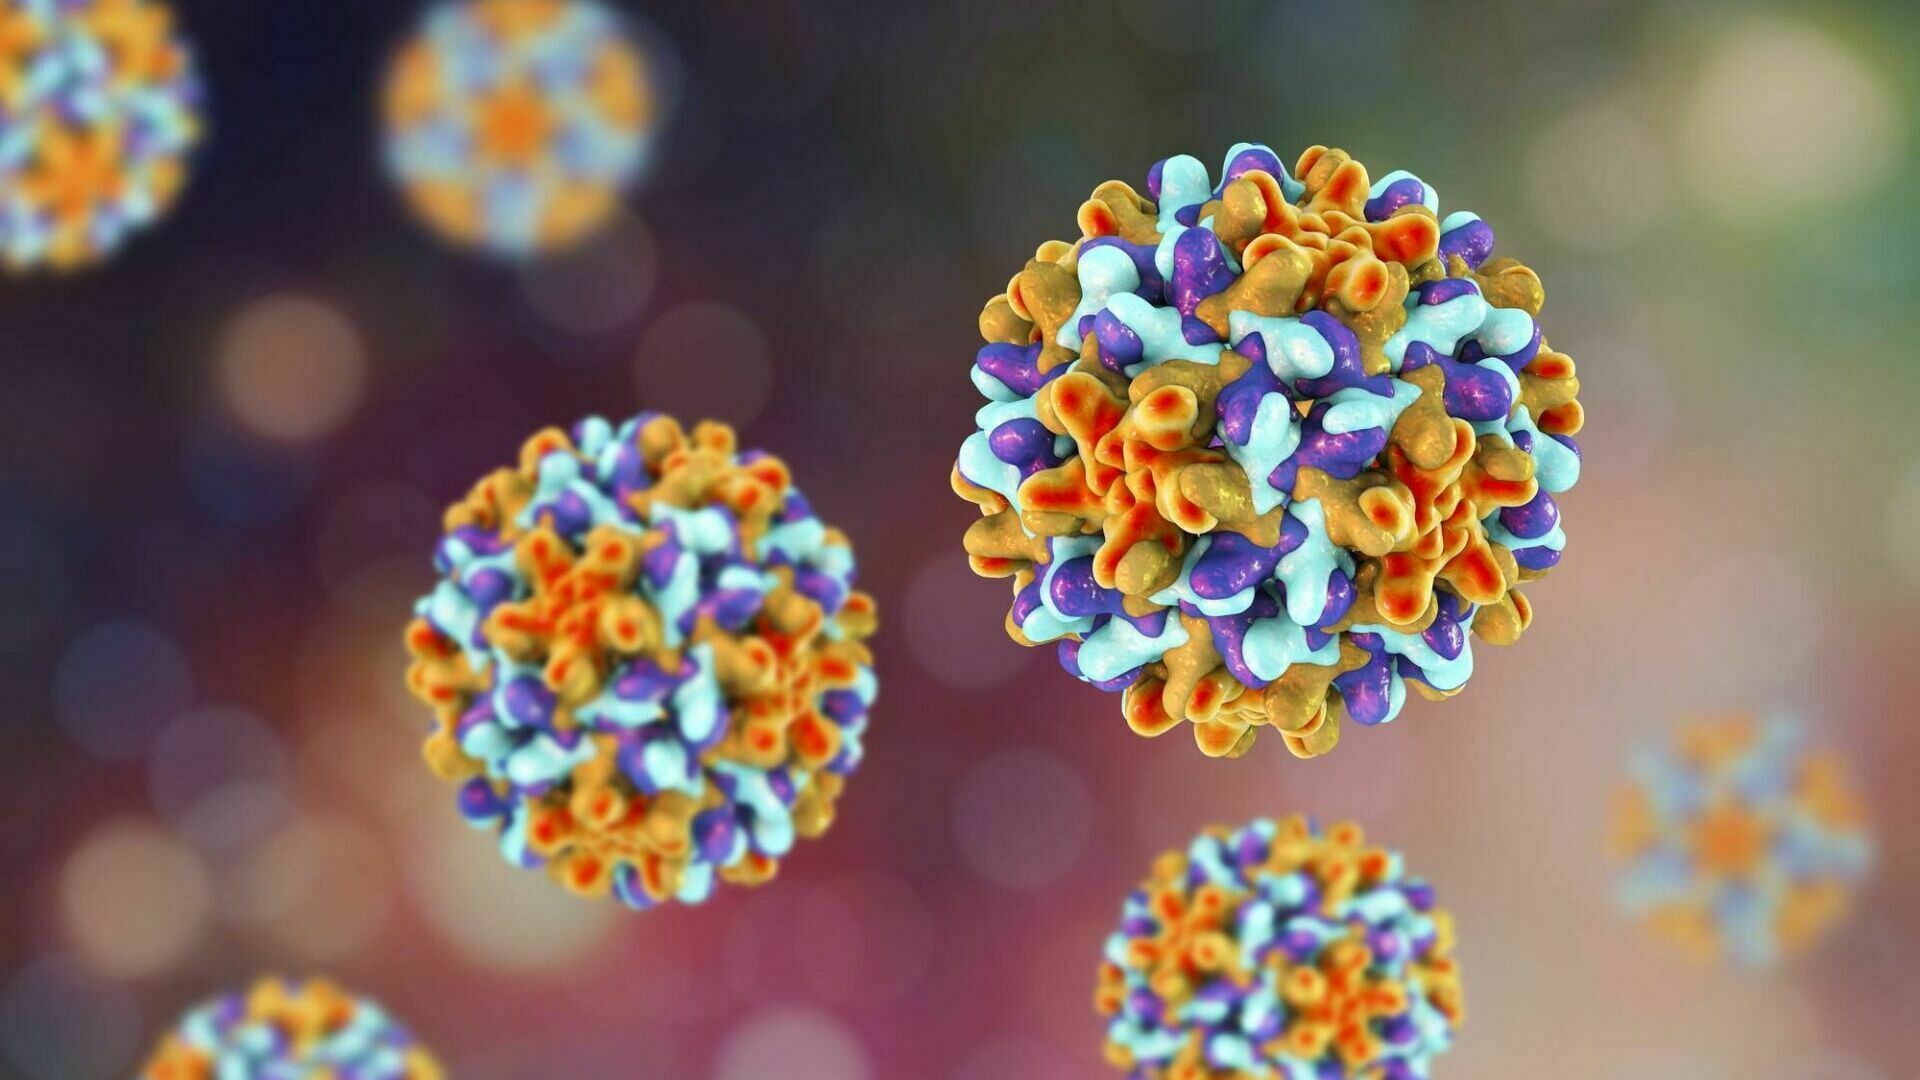 The virus will disappear forever: scientists have found a "weak spot" of chronic hepatitis B